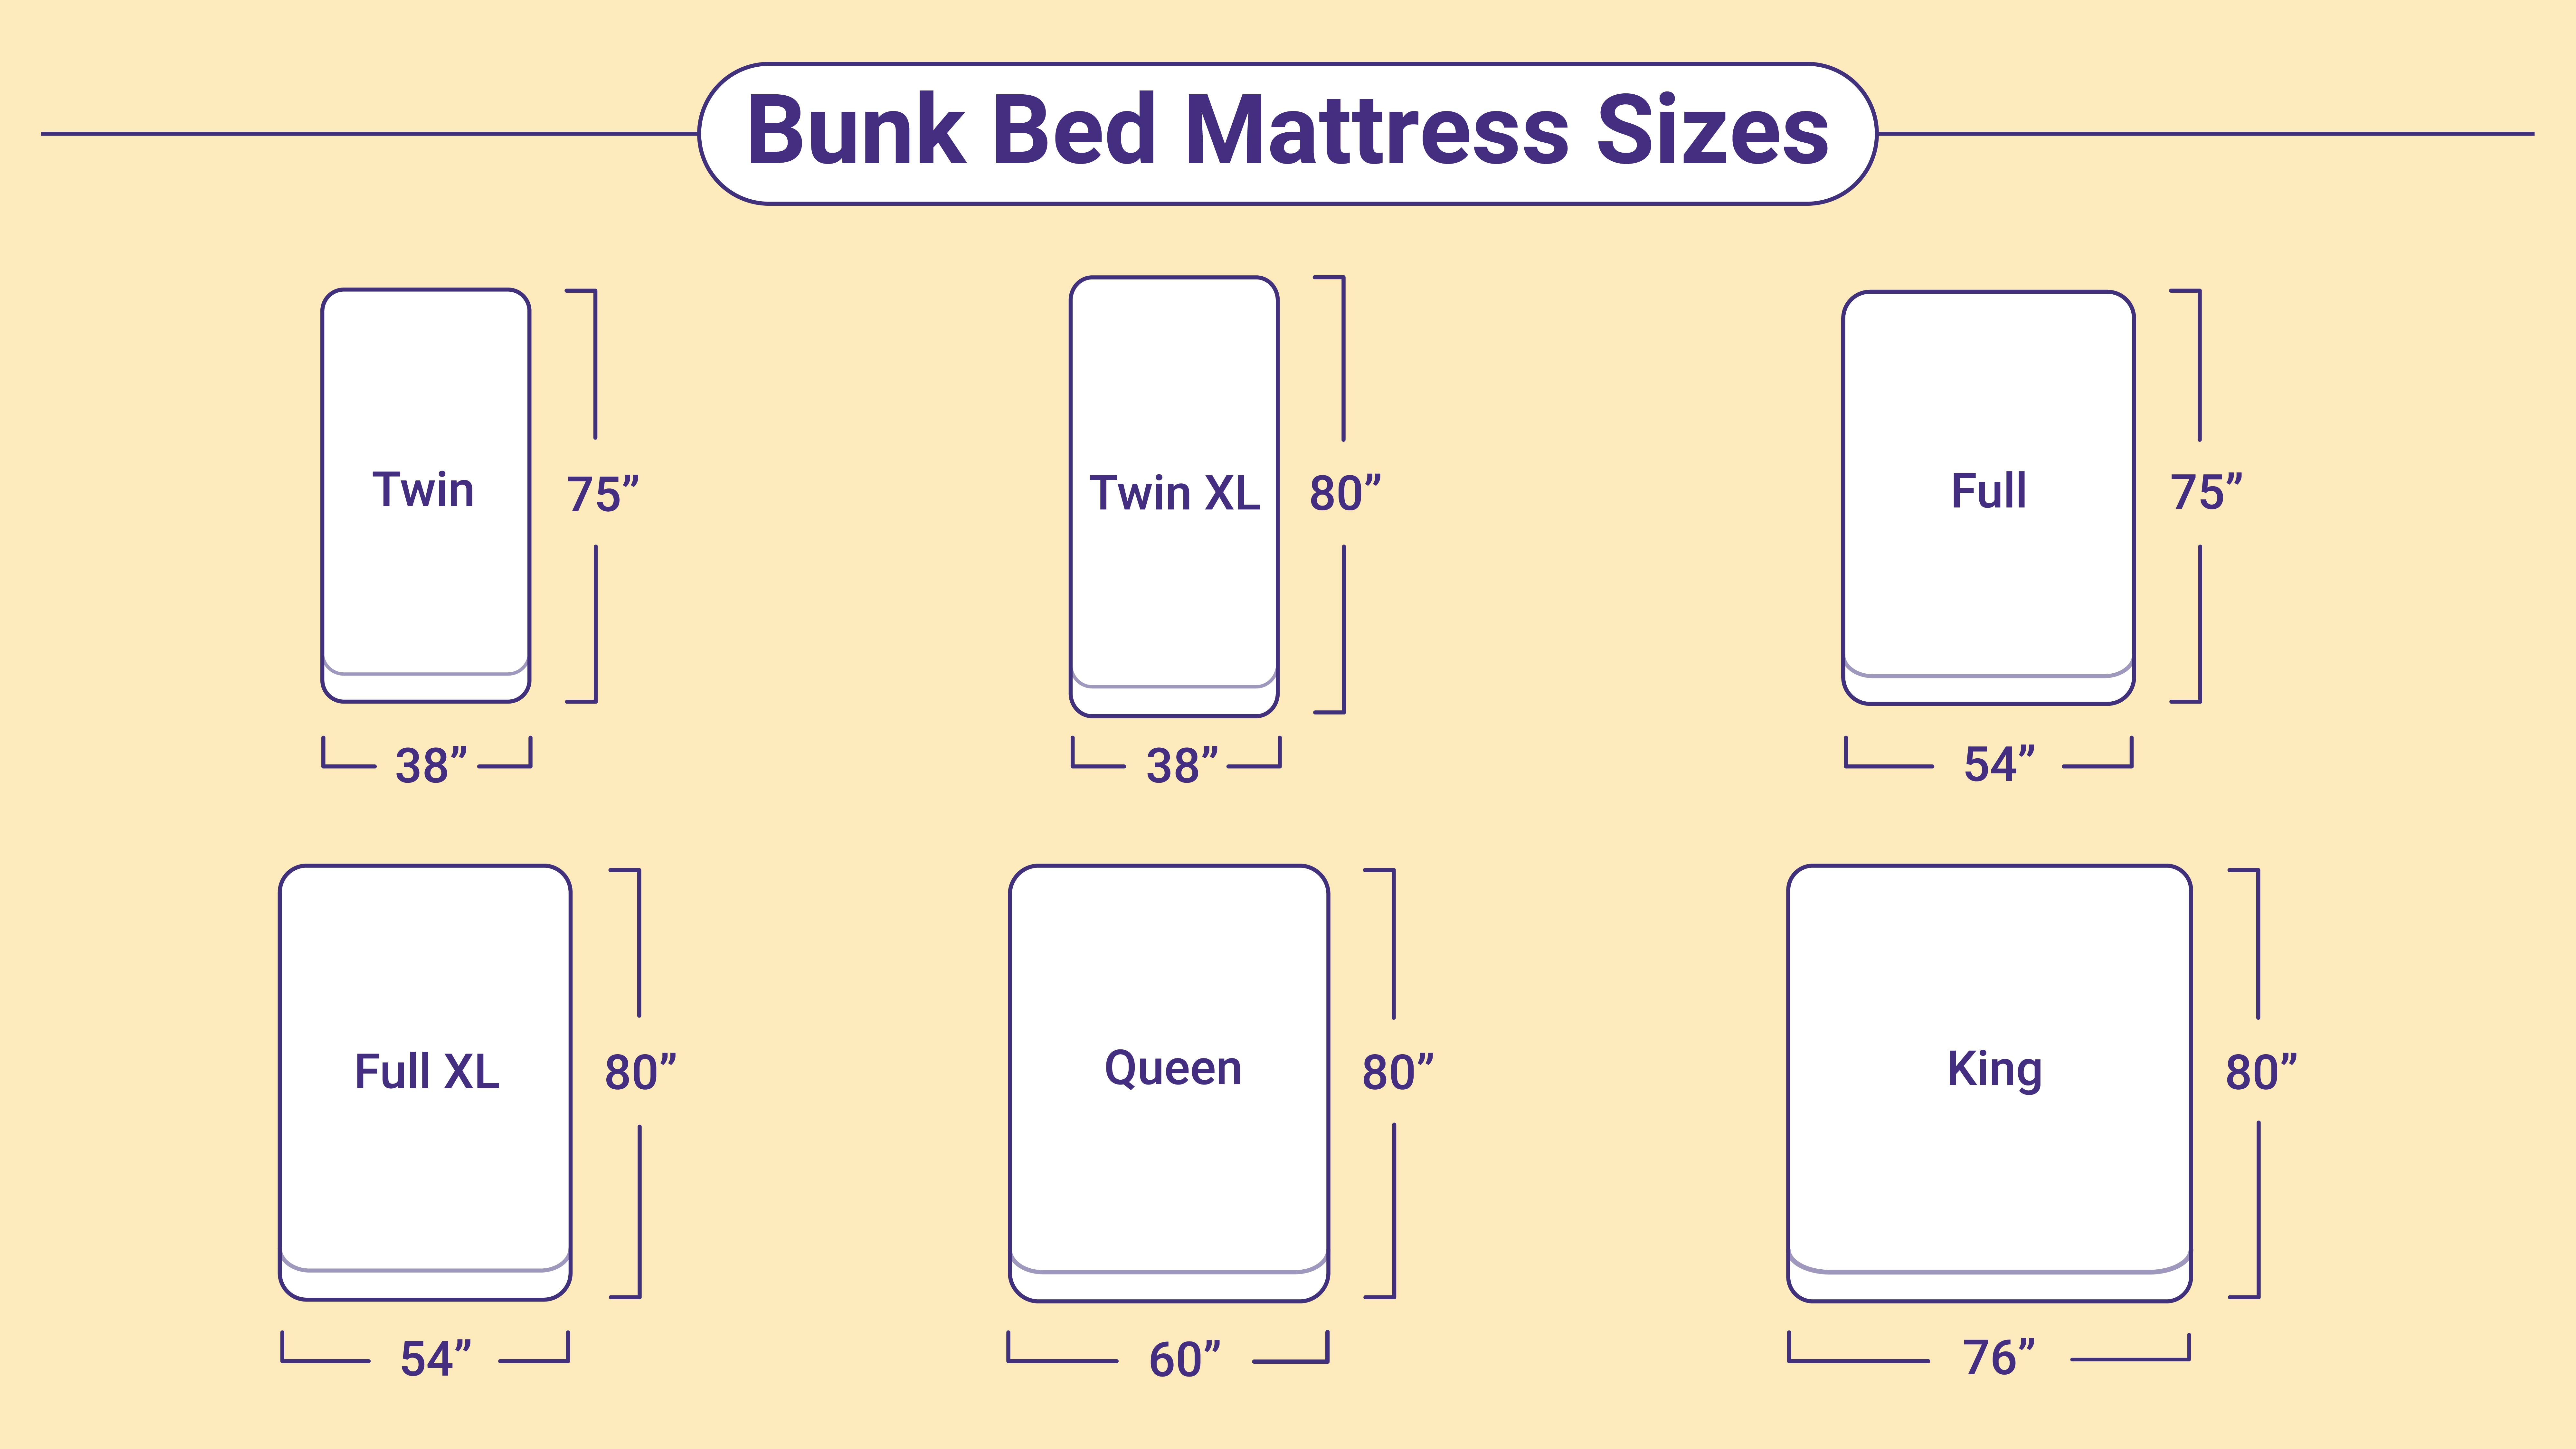 Bunk Bed Mattress Sizes And Dimensions, Single Bunk Bed Dimensions